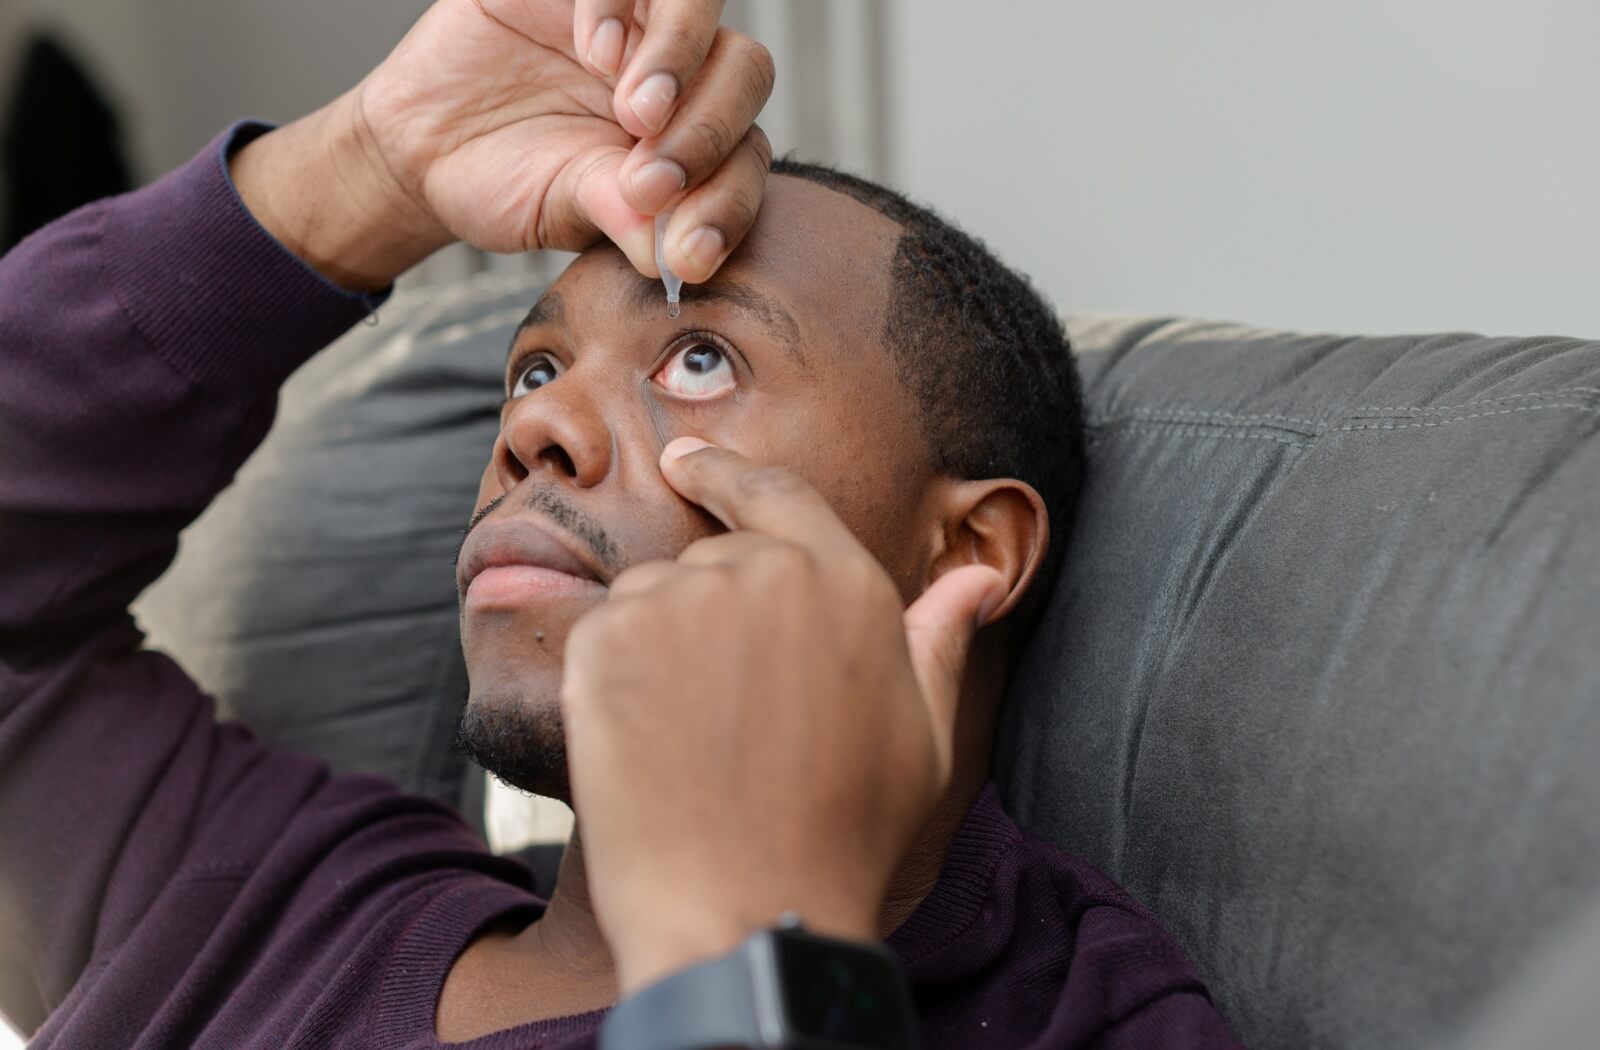 A man pulling his lower eyelid to apply eye drops on his eye.